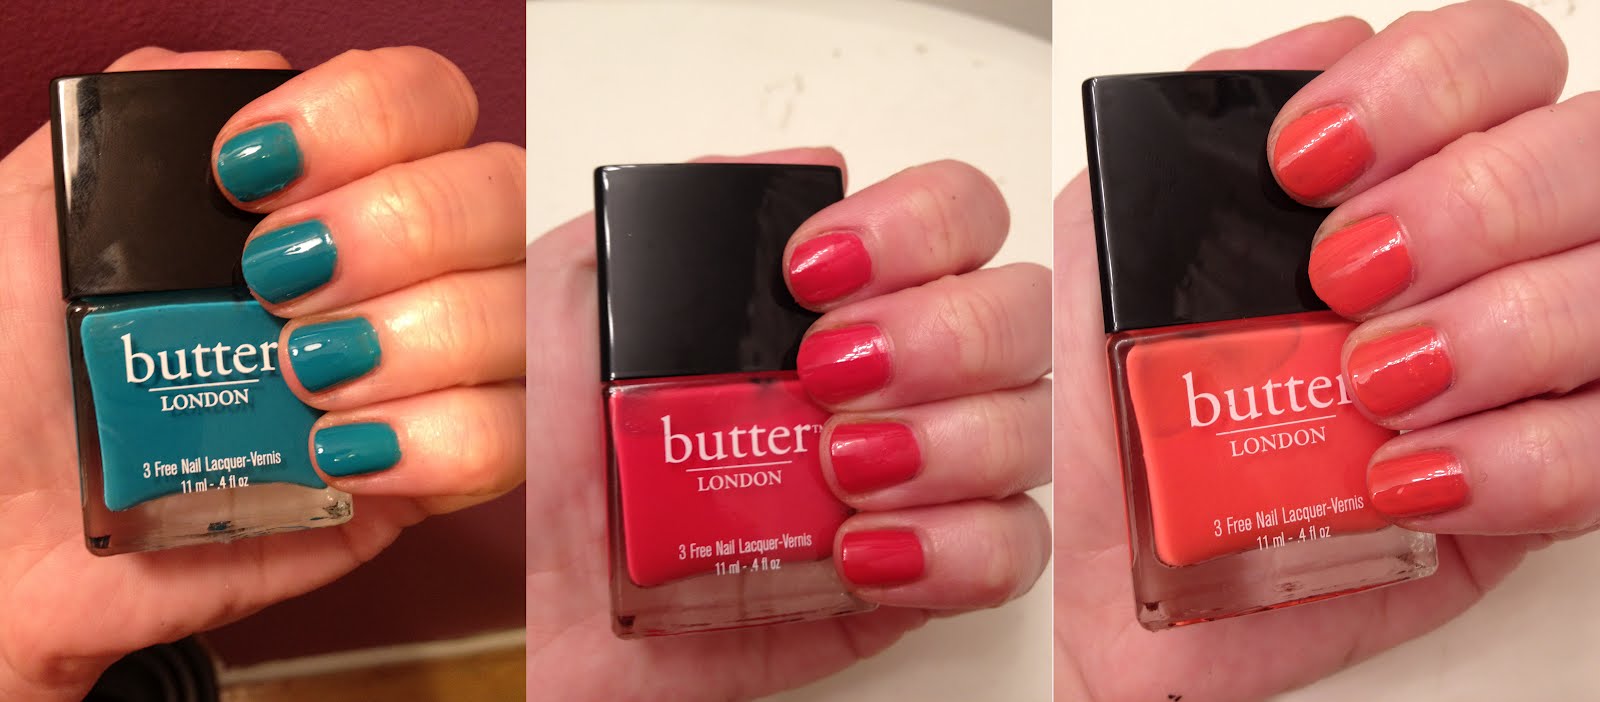 Butter London Nail Lacquer in "Earl Grey" - wide 6